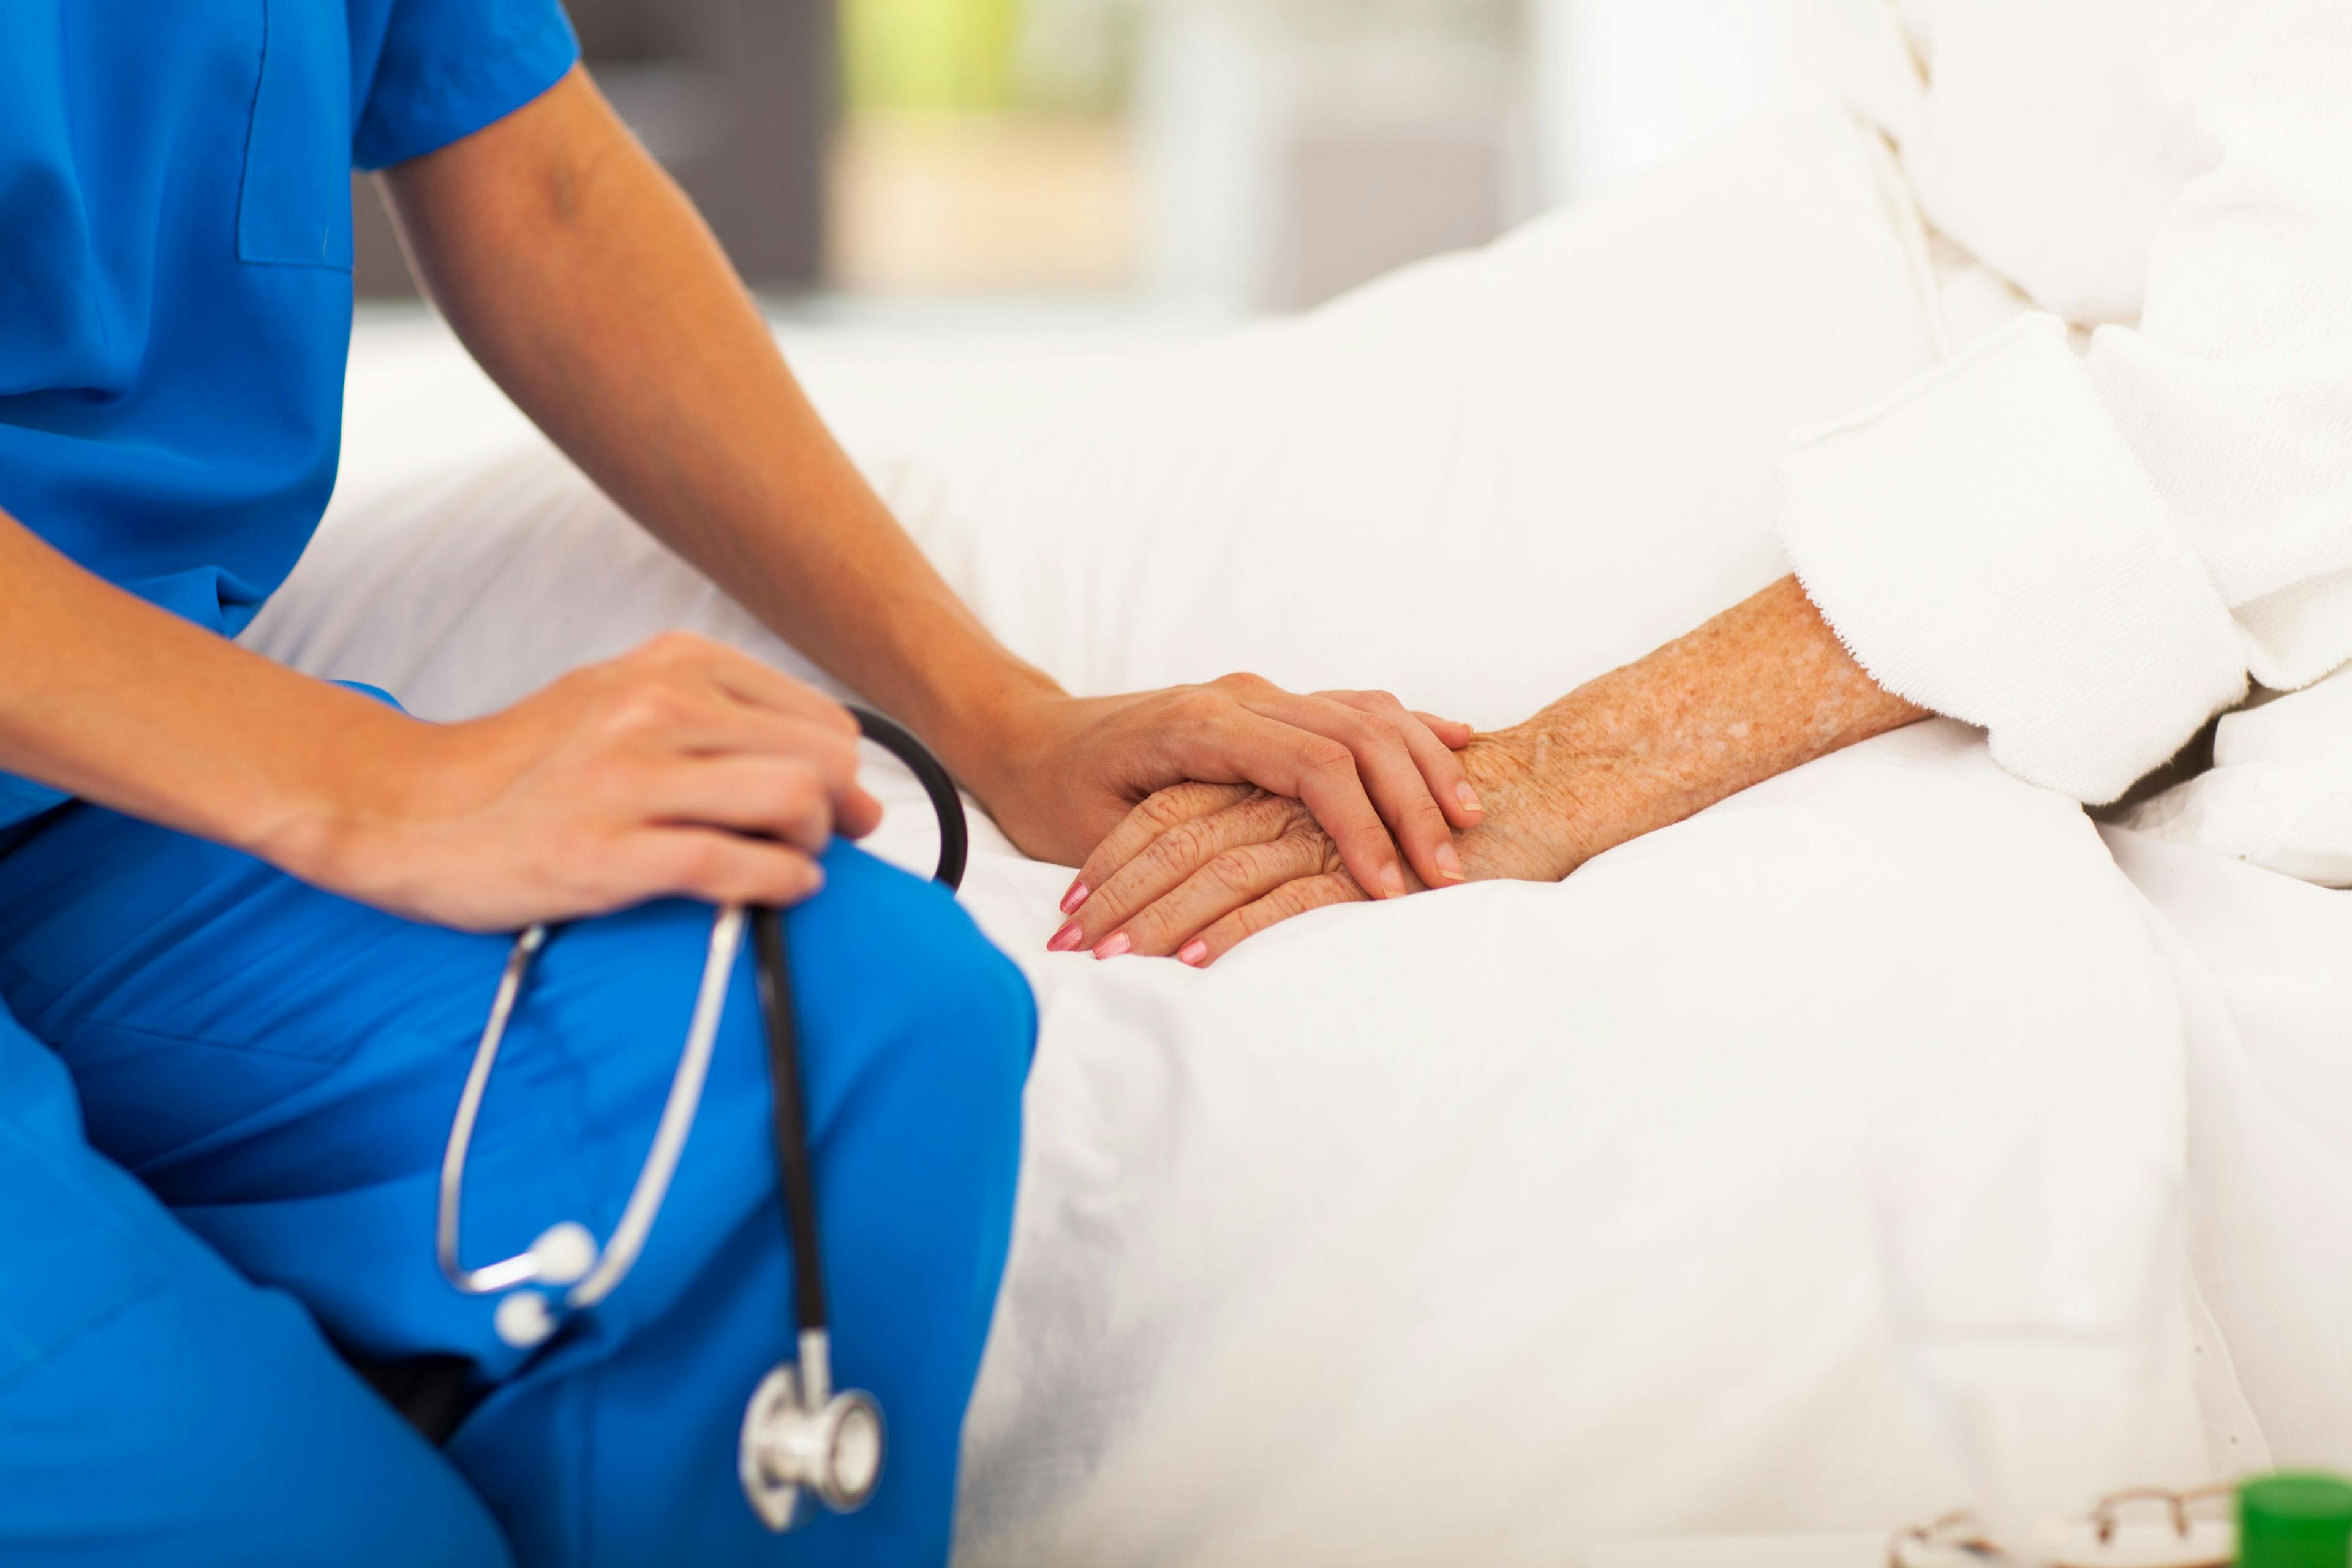 A close-up photo of a care provider holding the hand of an older person in the hospital.